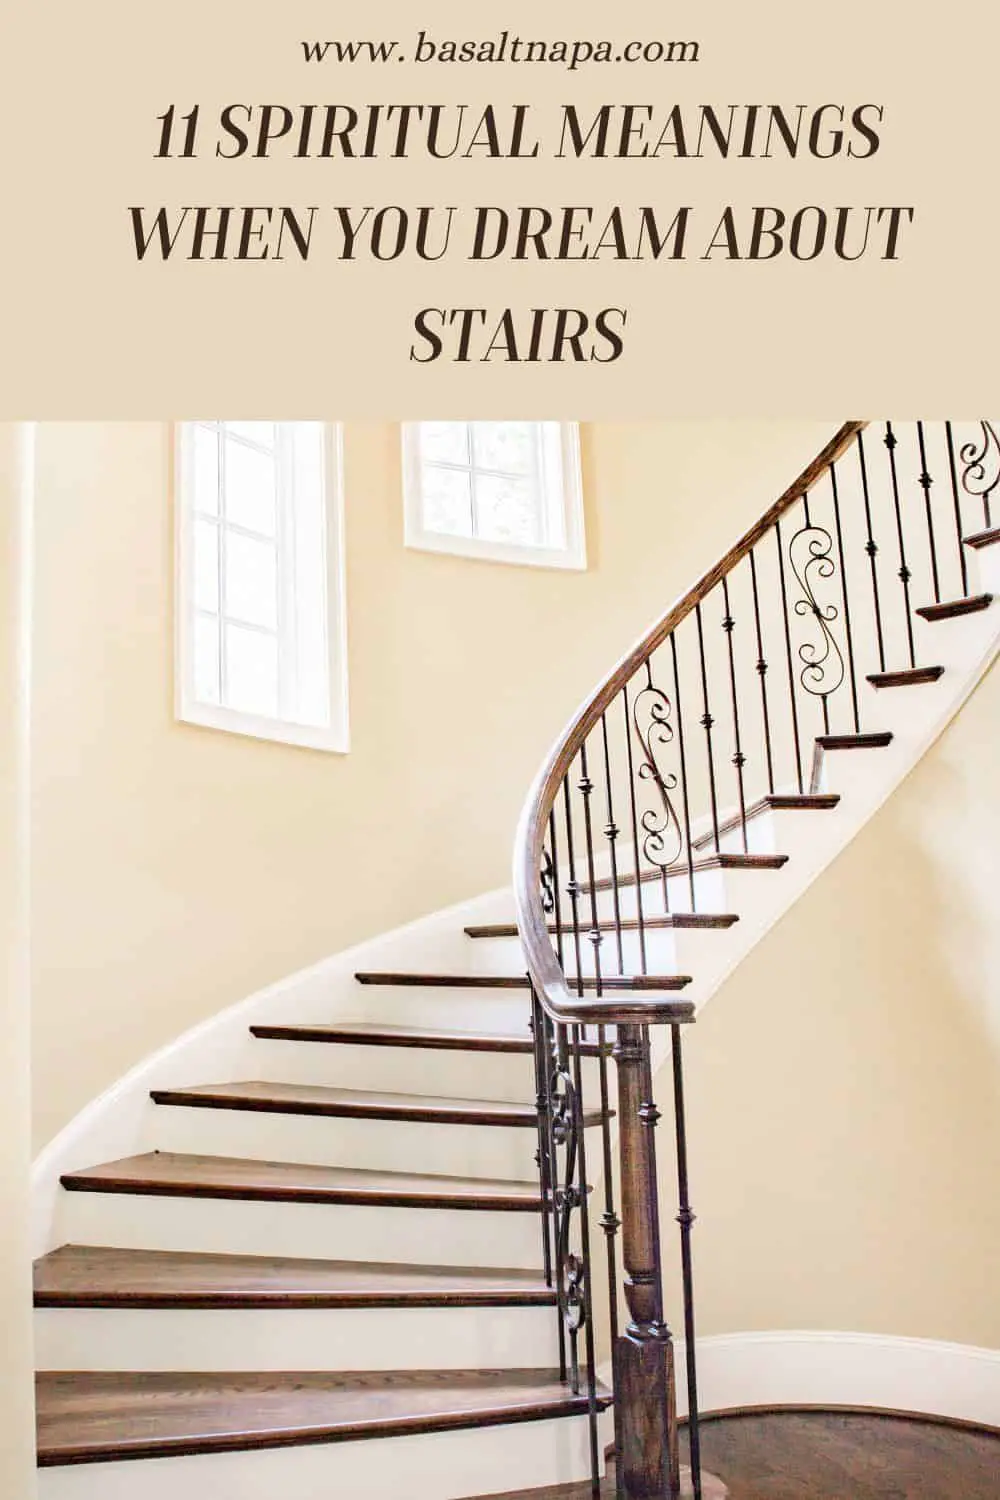 What Does It Mean When You Dream About Stairs?